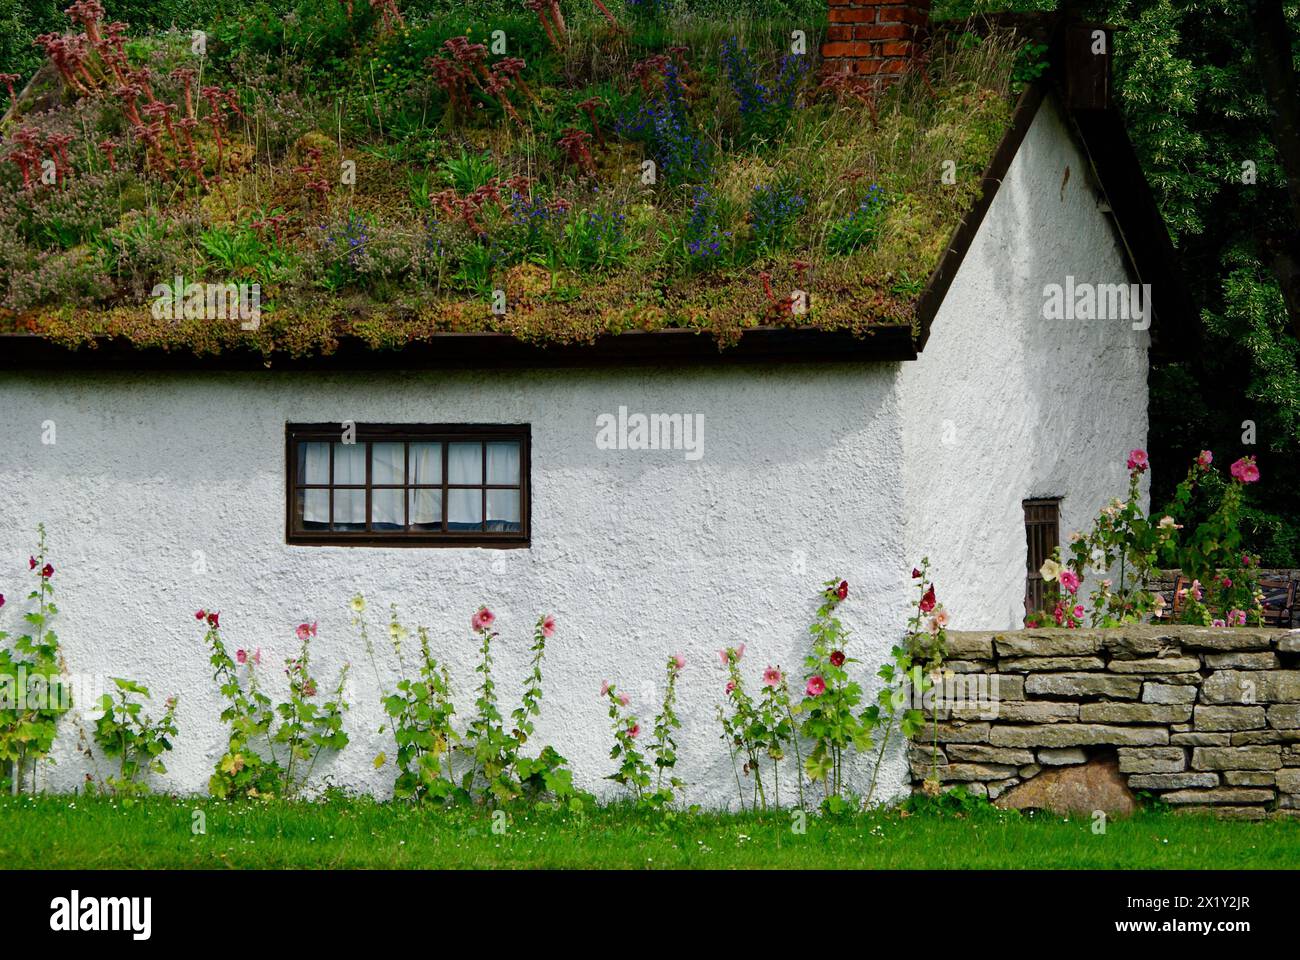 Old white chalked stone building with a small window and with hollyhock flowers against the wall and plants on the roof. Stock Photo